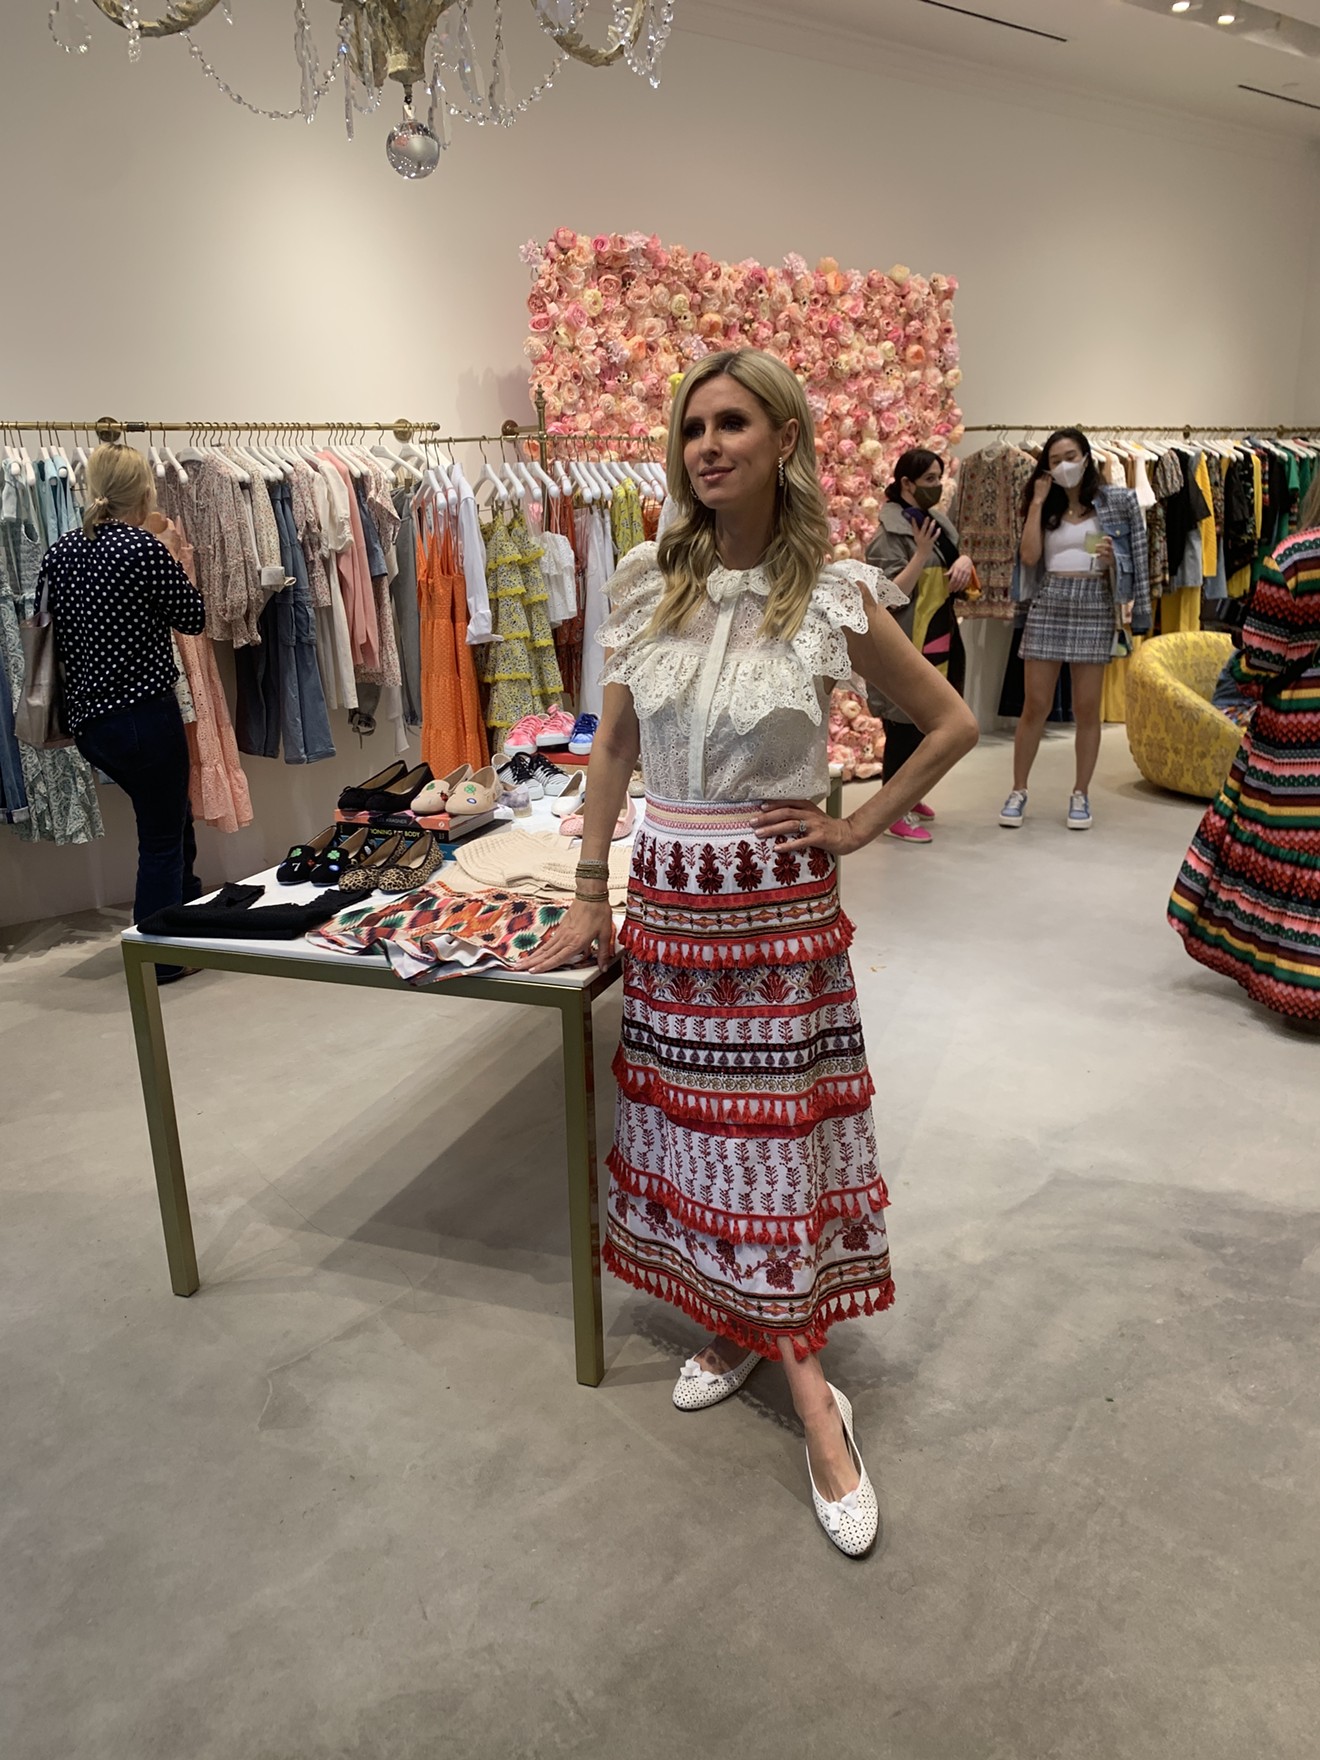 Nicky Hilton poses in front of her shoe line at Alice + Olivia in Highland Park Village.